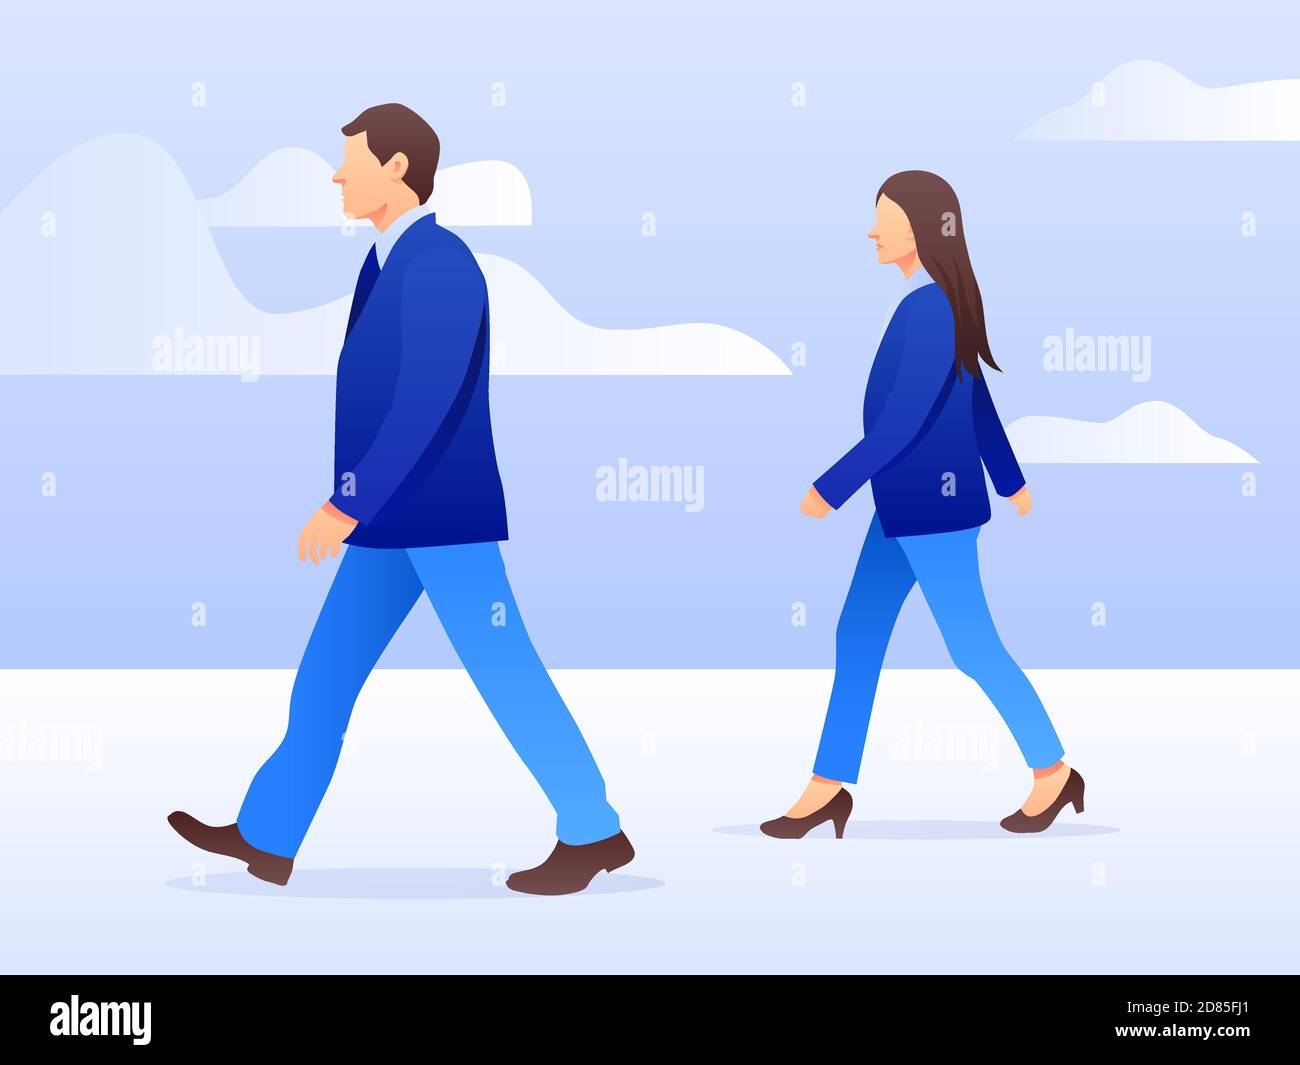 Vector set of walking and standing business characters. International business team. Simple flat design in blue colors. Stock Vector